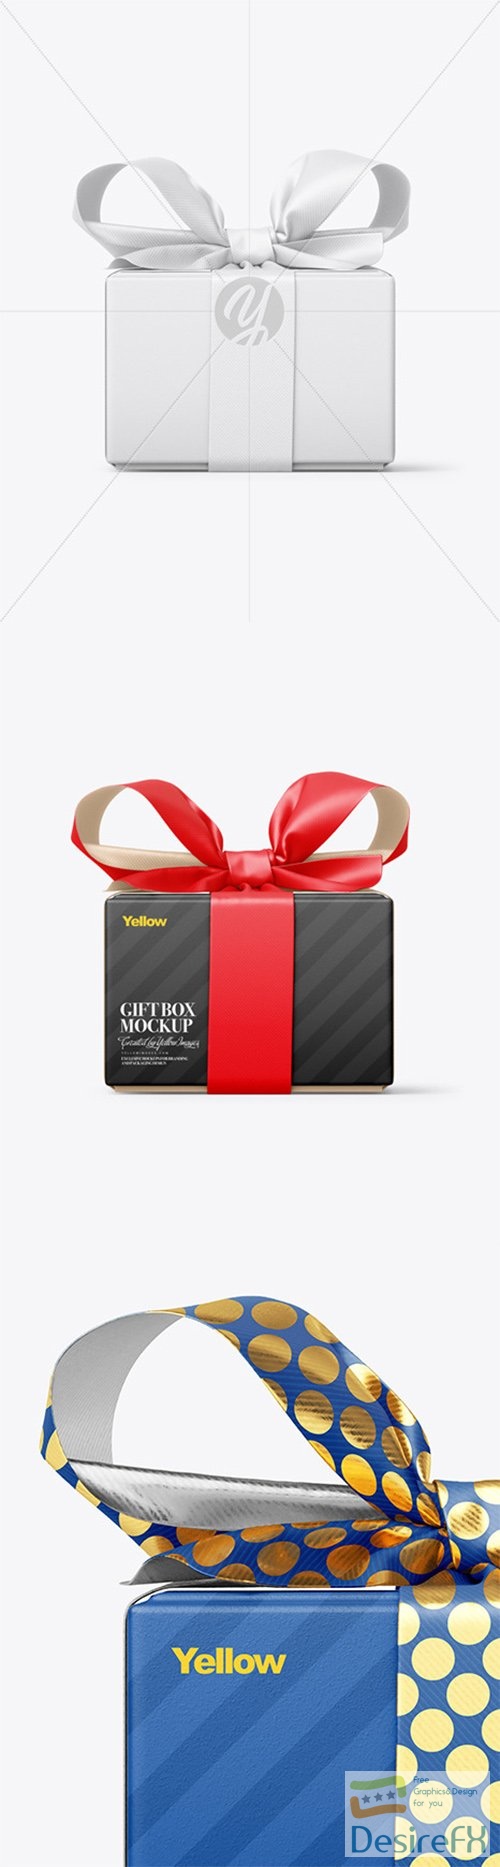 Gift Box With Matte Bow Mockup - Front View 78754 TIF